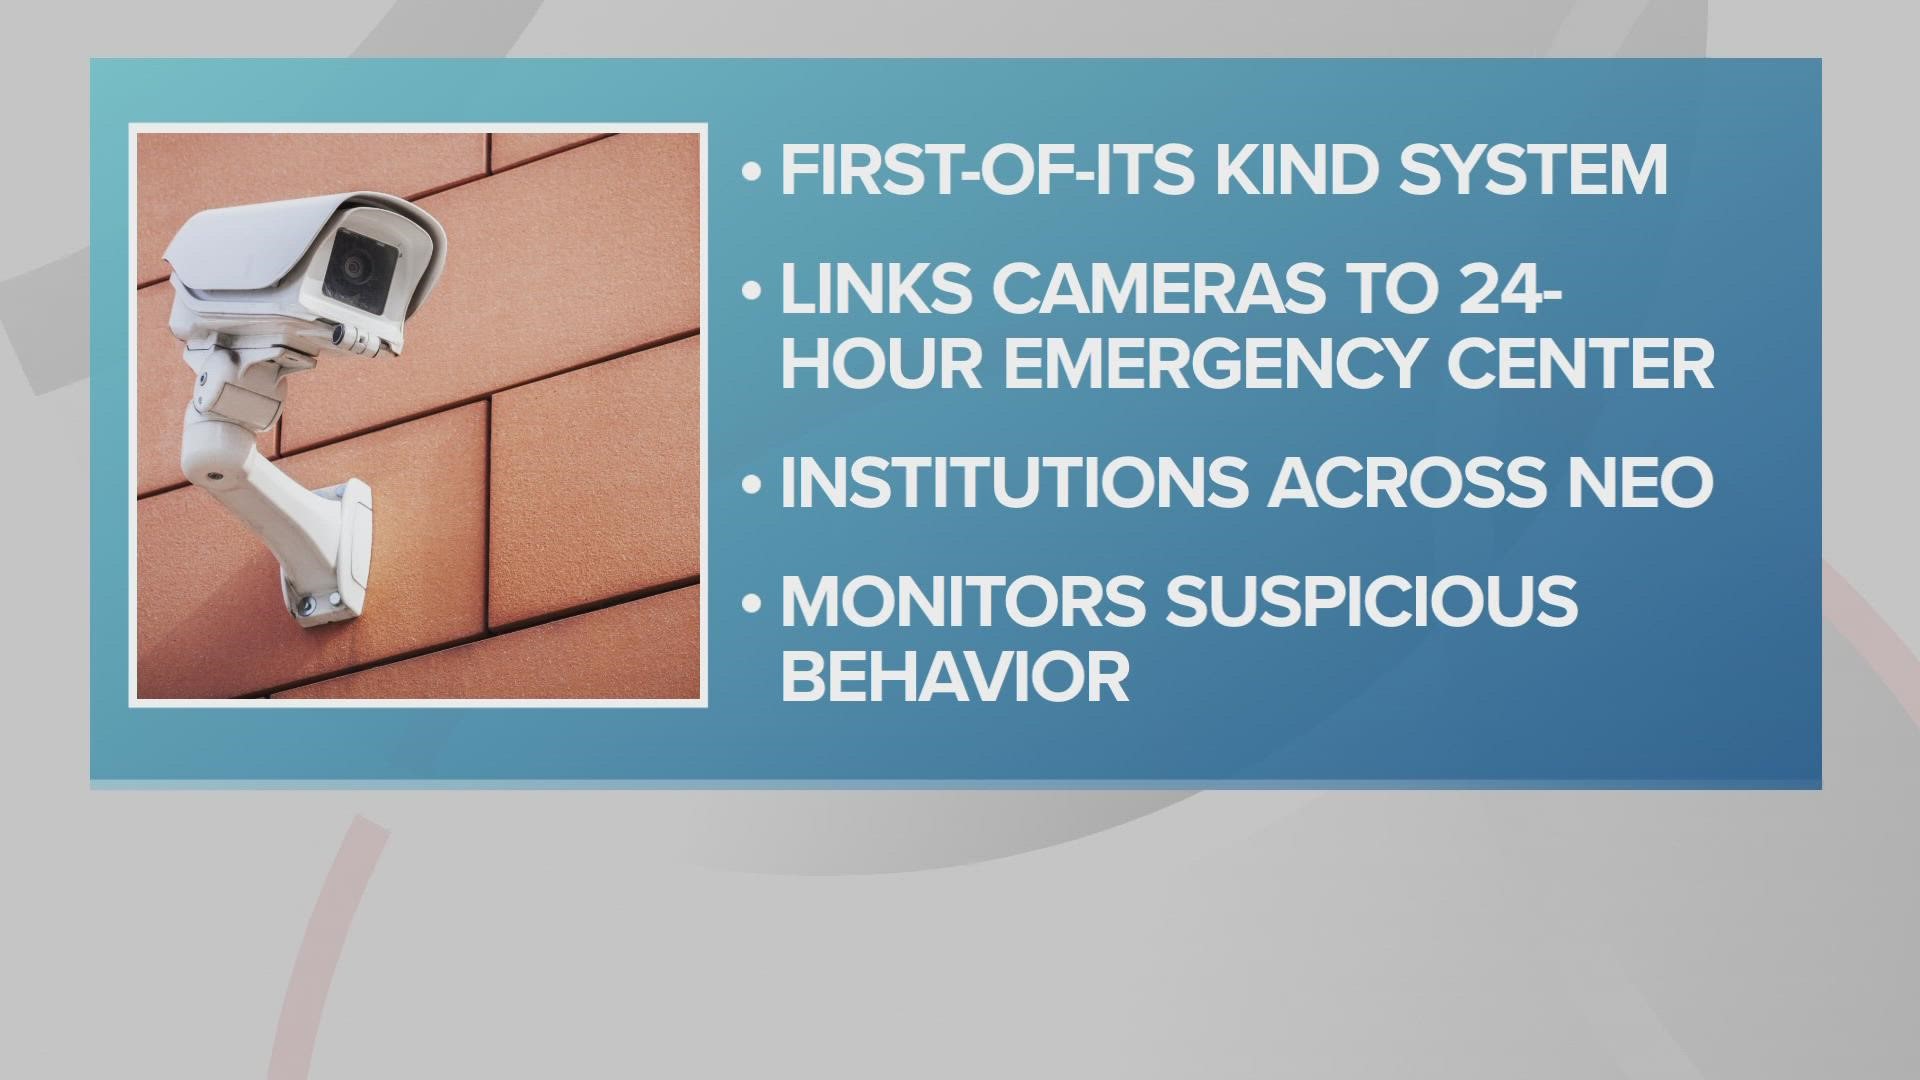 The system was created and implemented by JFC Security, and is a first of its kind in the U.S.